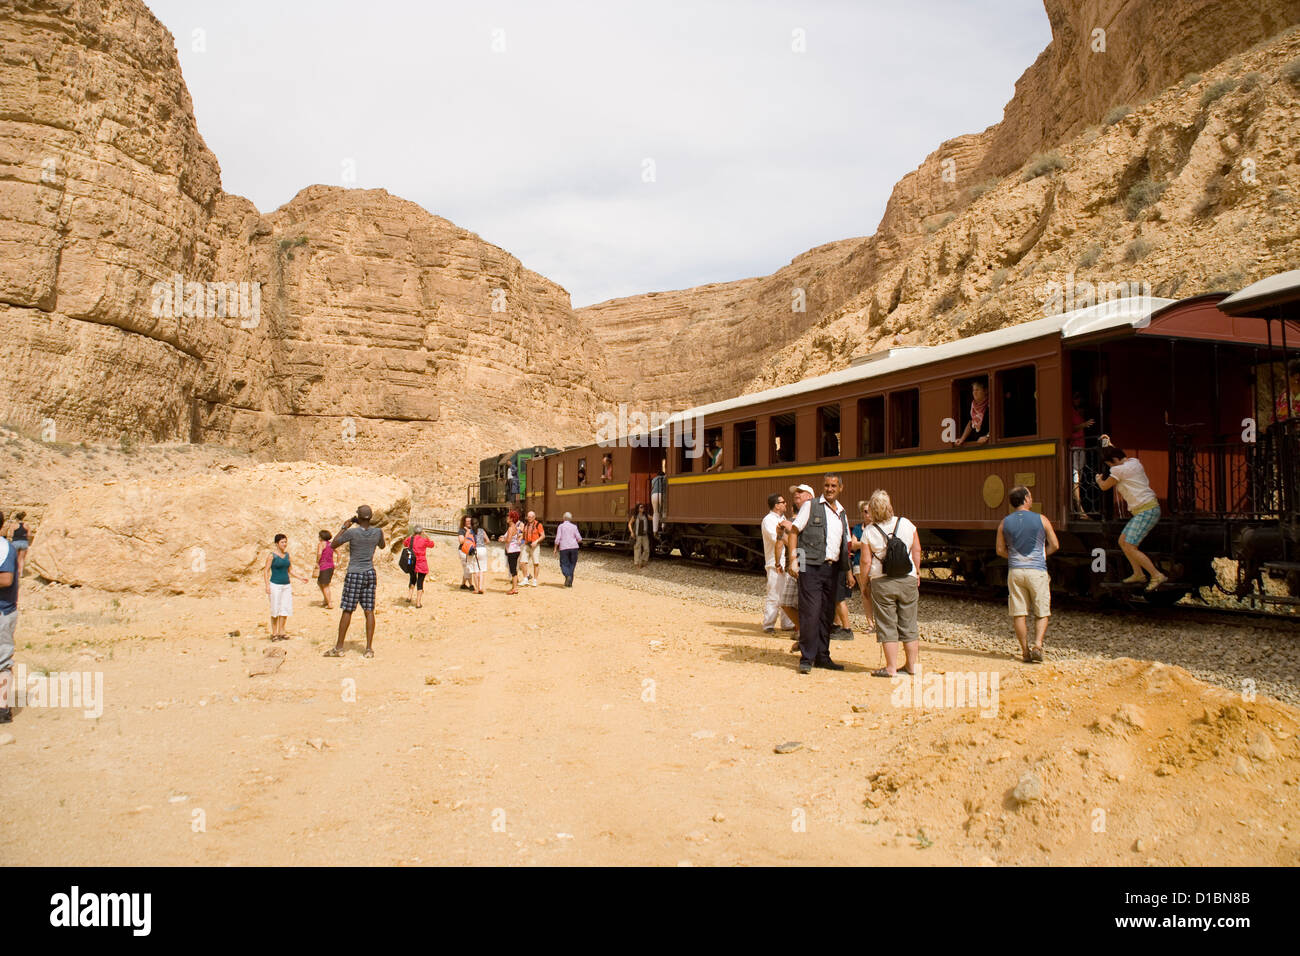 View of the Red Lizard train stopped in the Seldja Gorge from Metlaoui in  Tunisia Stock Photo - Alamy